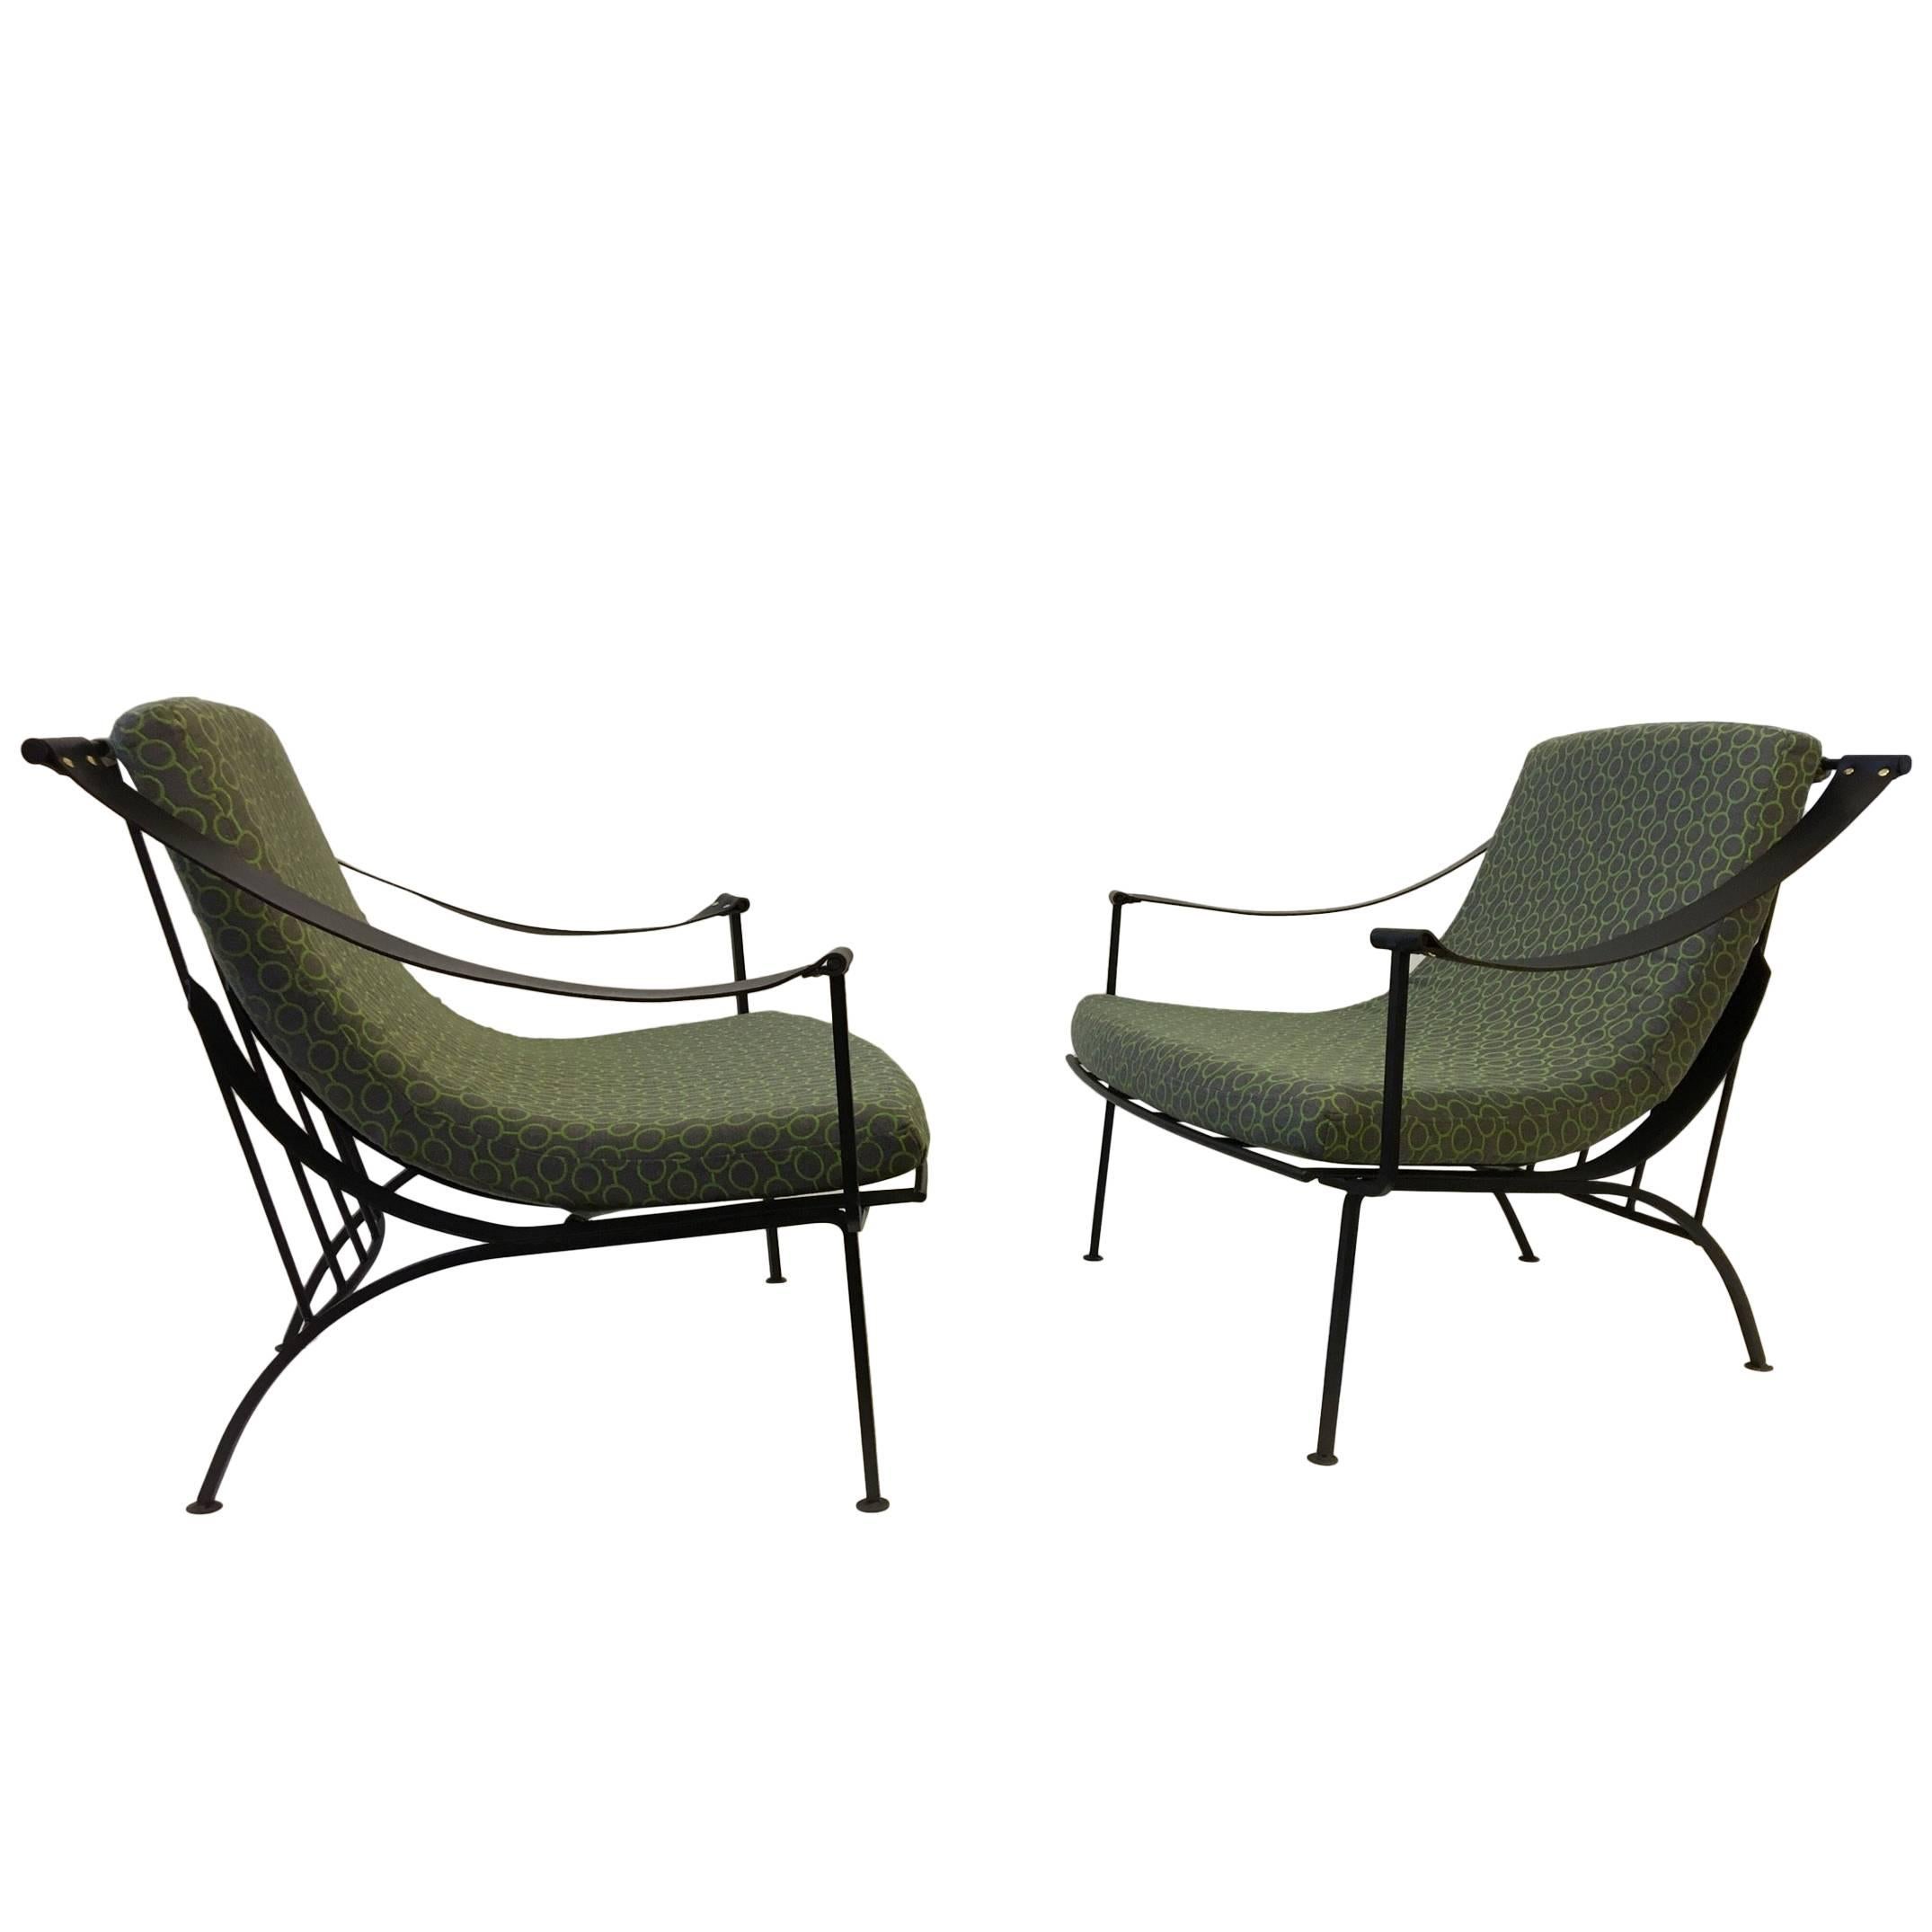 Pair of Wrought Iron and Fabric Lounge Chairs by Russell Woodard